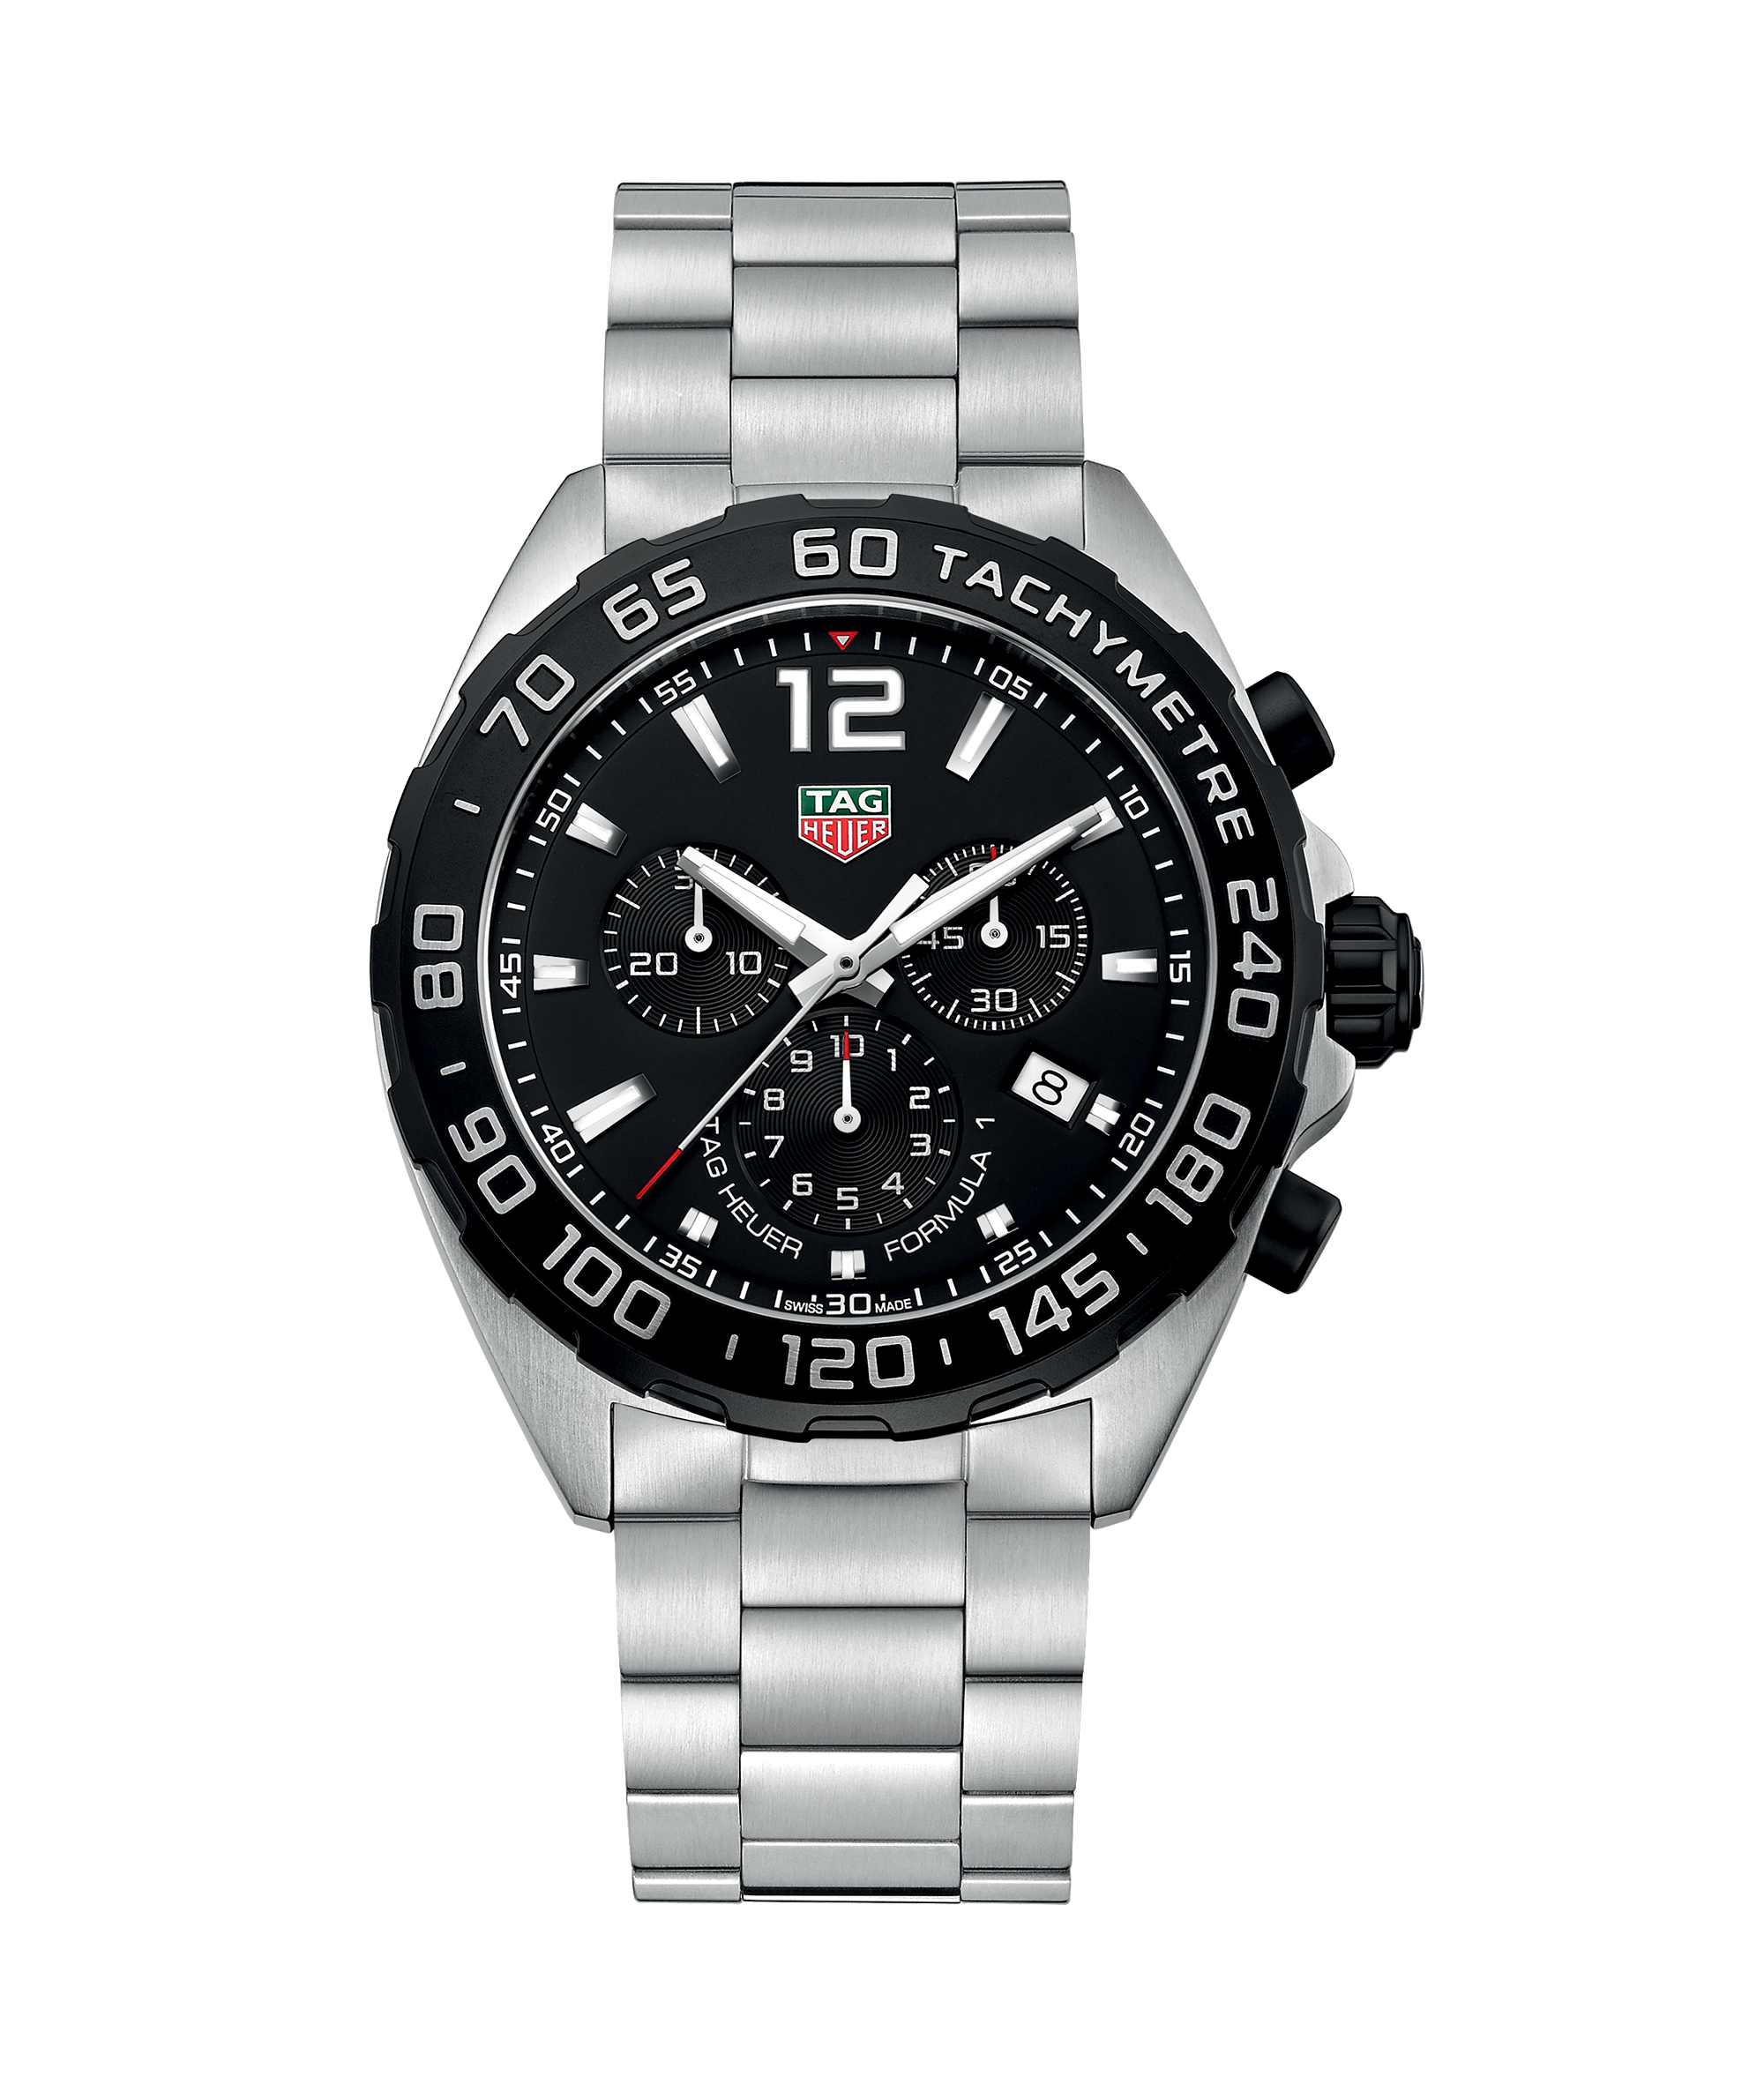 Tag heuer watches formula 1